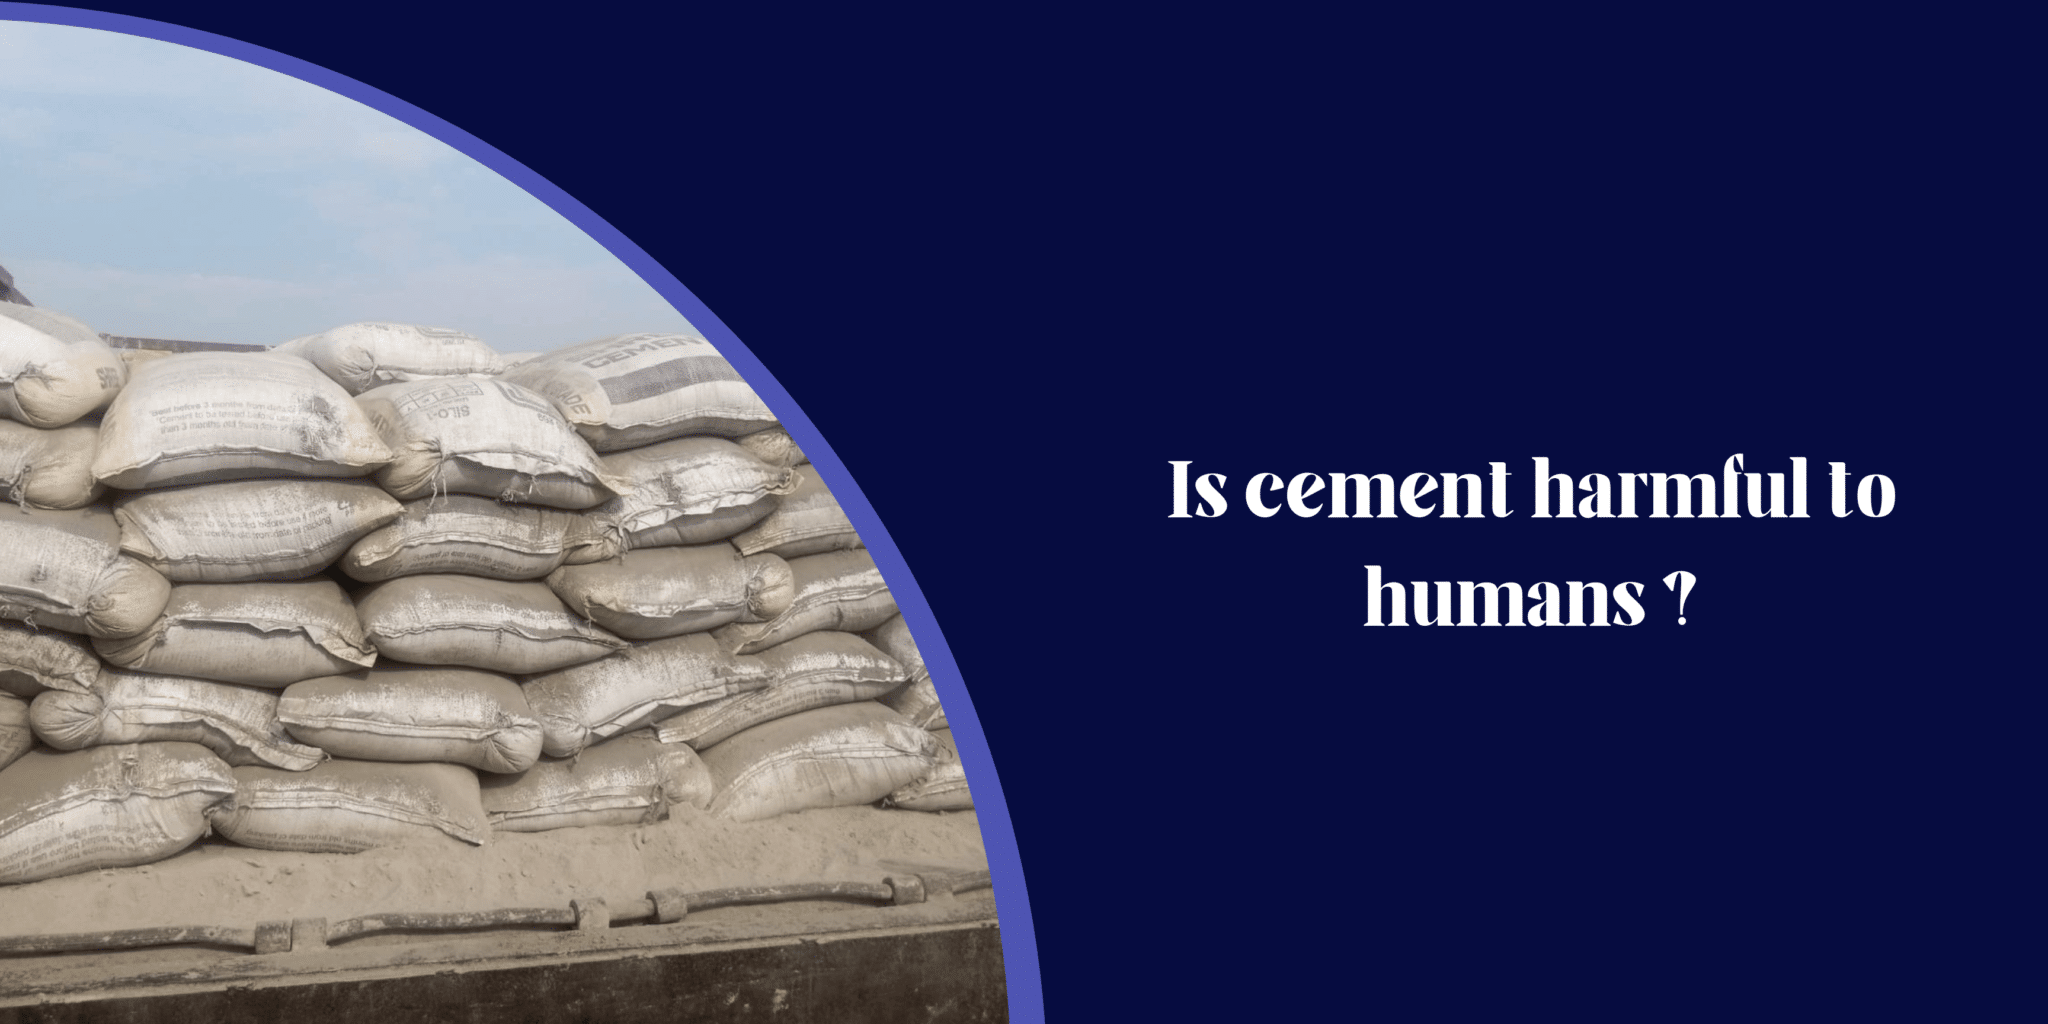 can cement cause cancer
